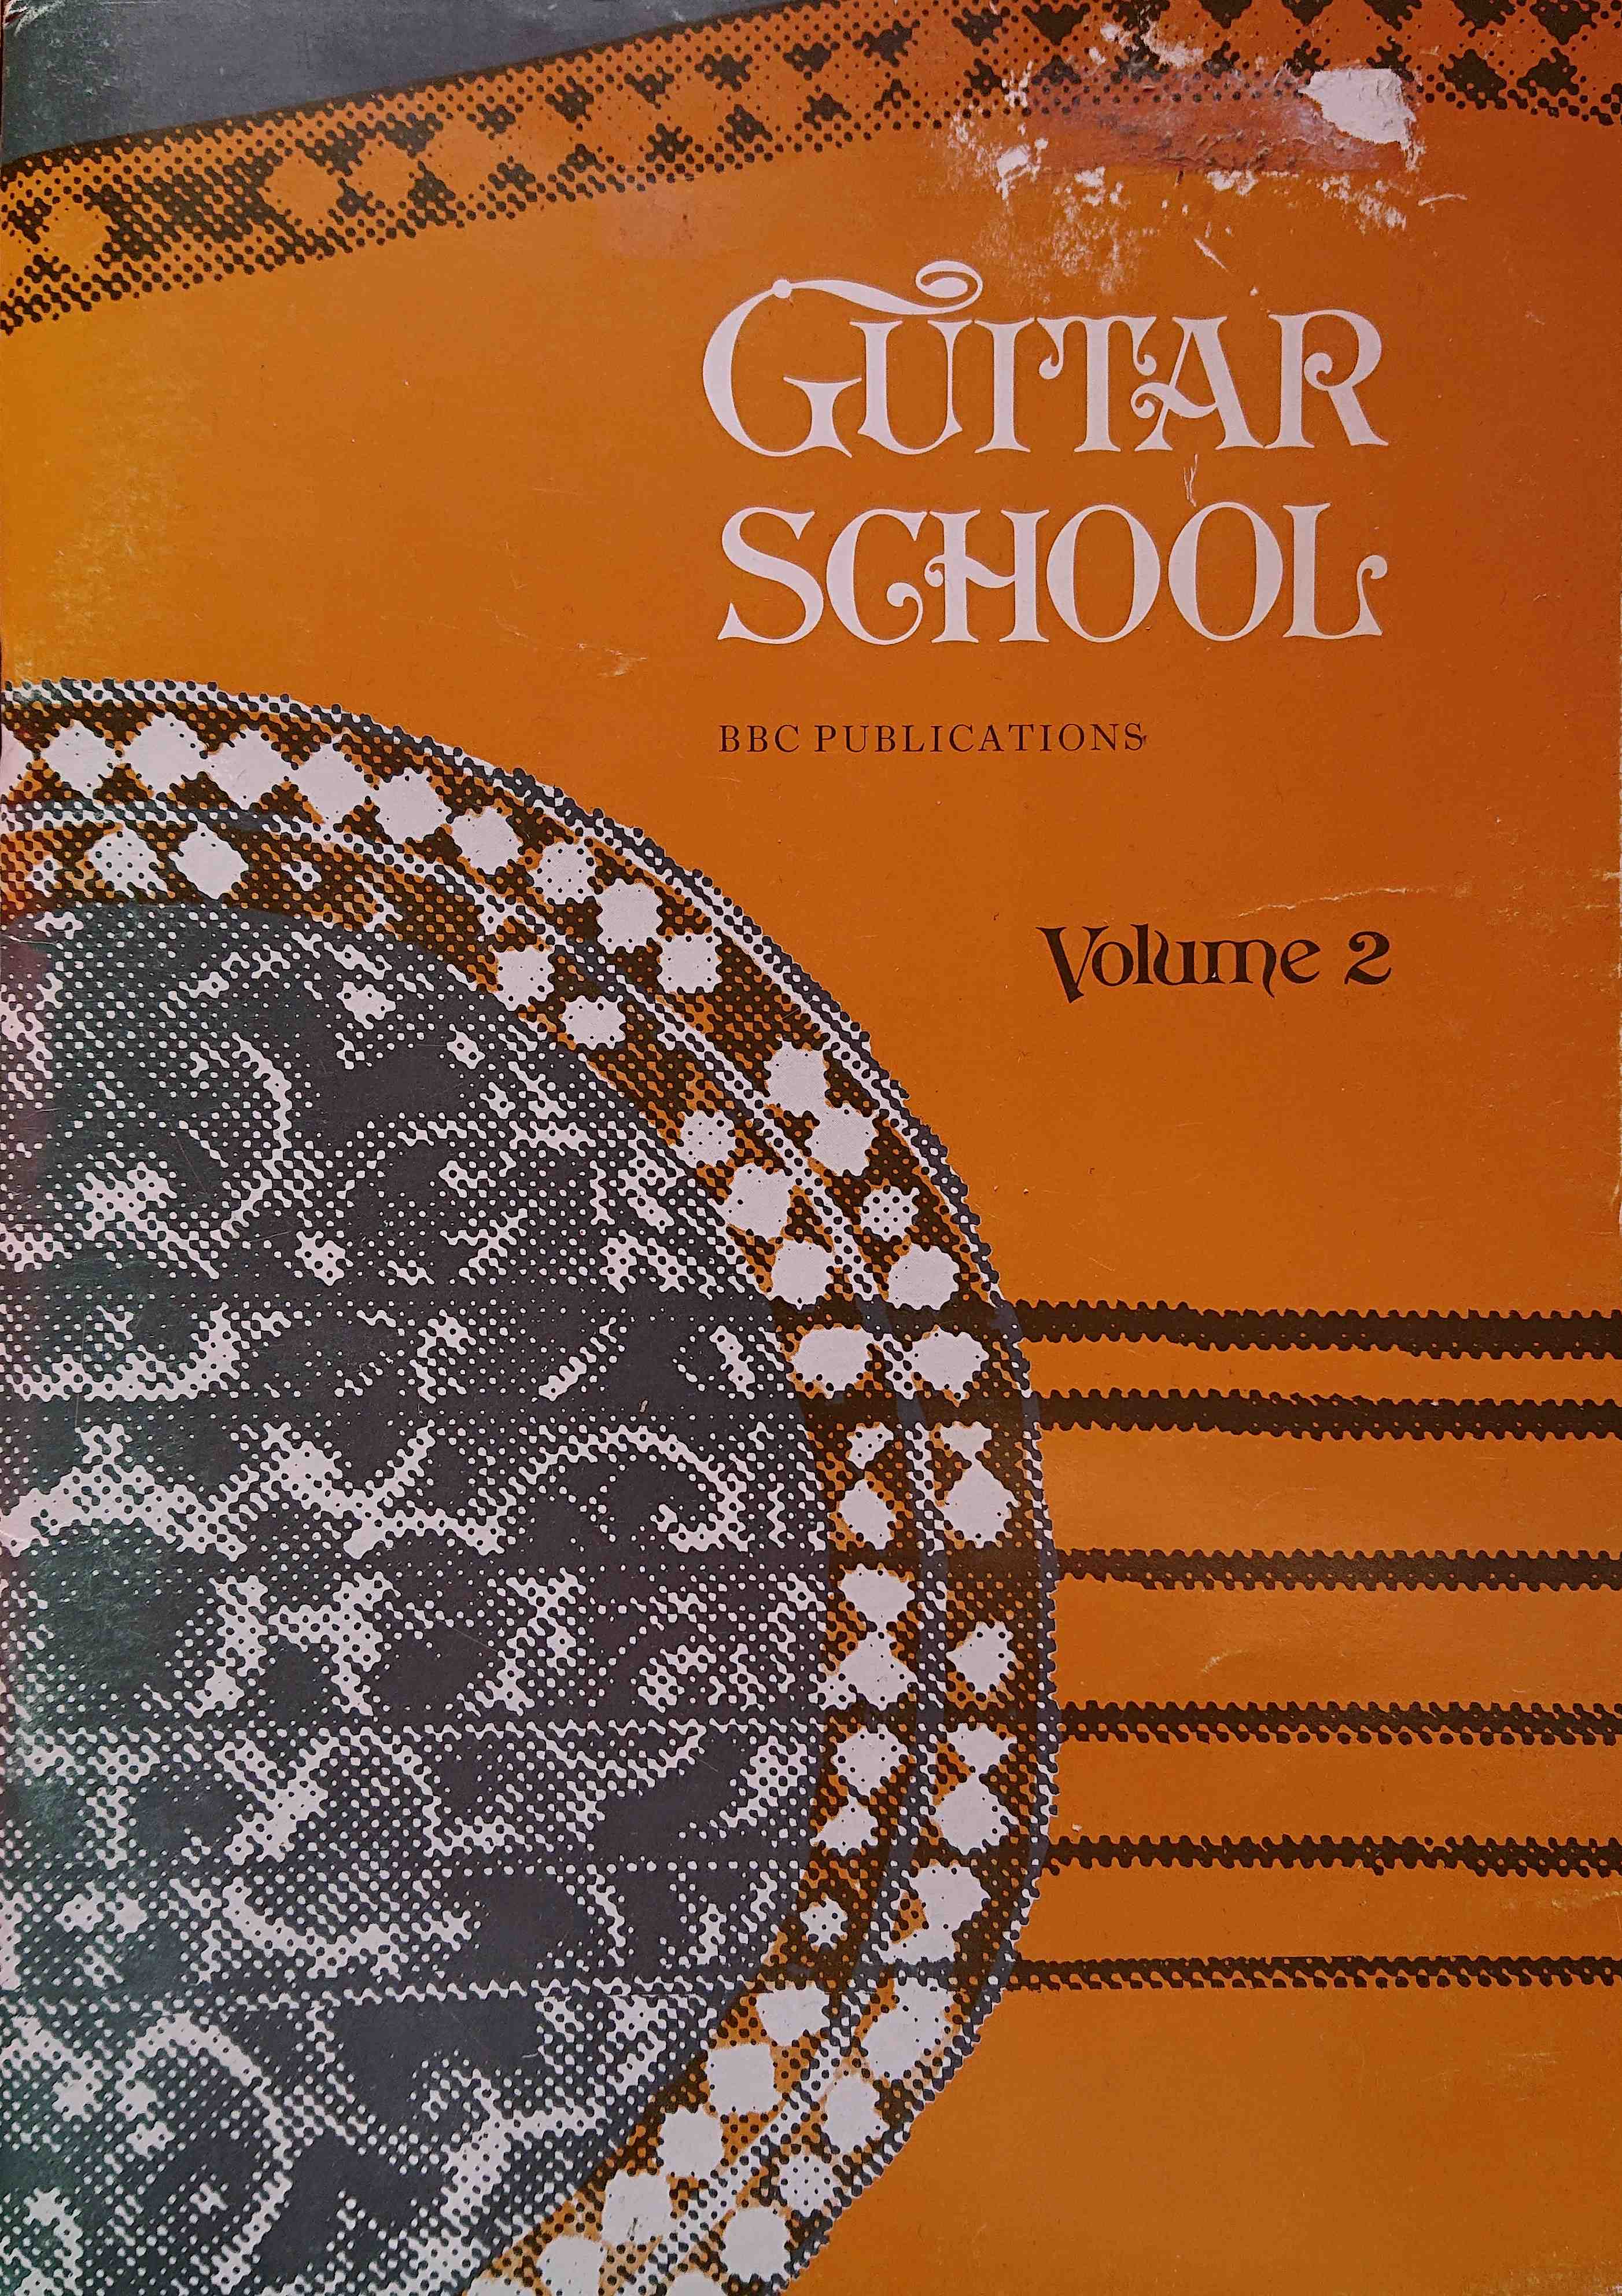 Picture of ISBN 0 563 11267 0 Guitar school - Volume 2 by artist Michael Jessett from the BBC books - Records and Tapes library